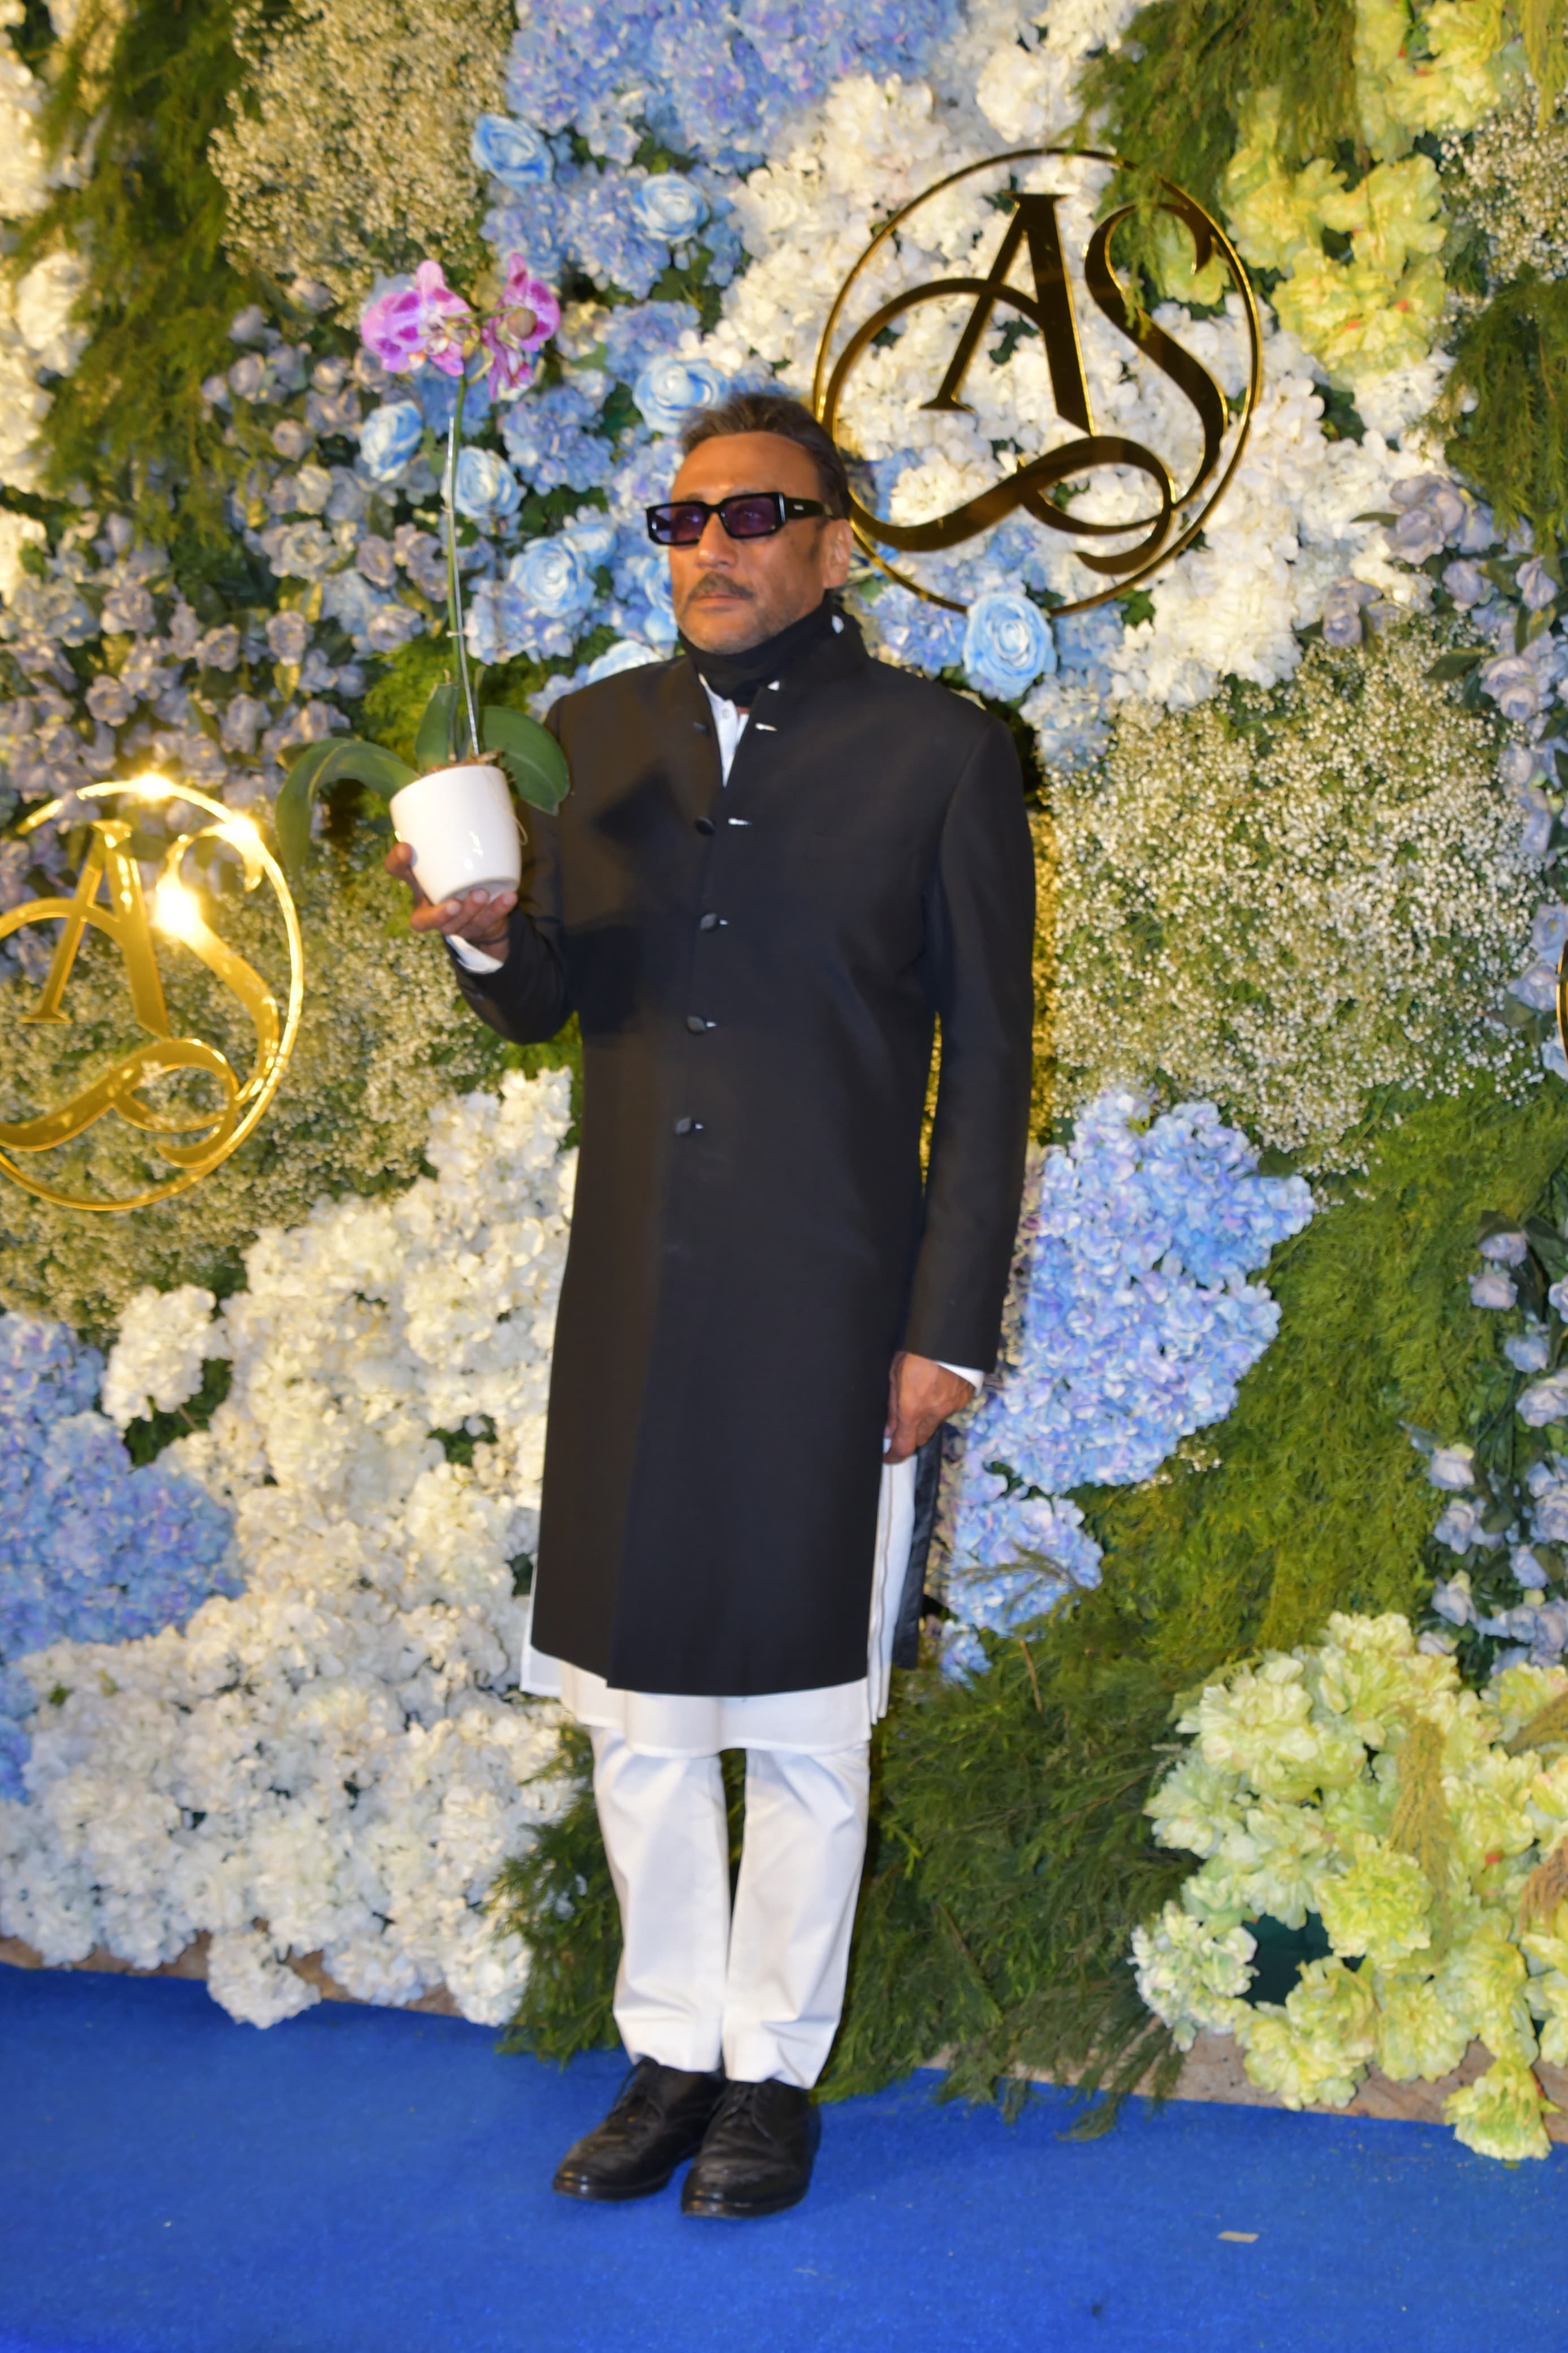 Jackky Shroff with his cute plant posed for cameras